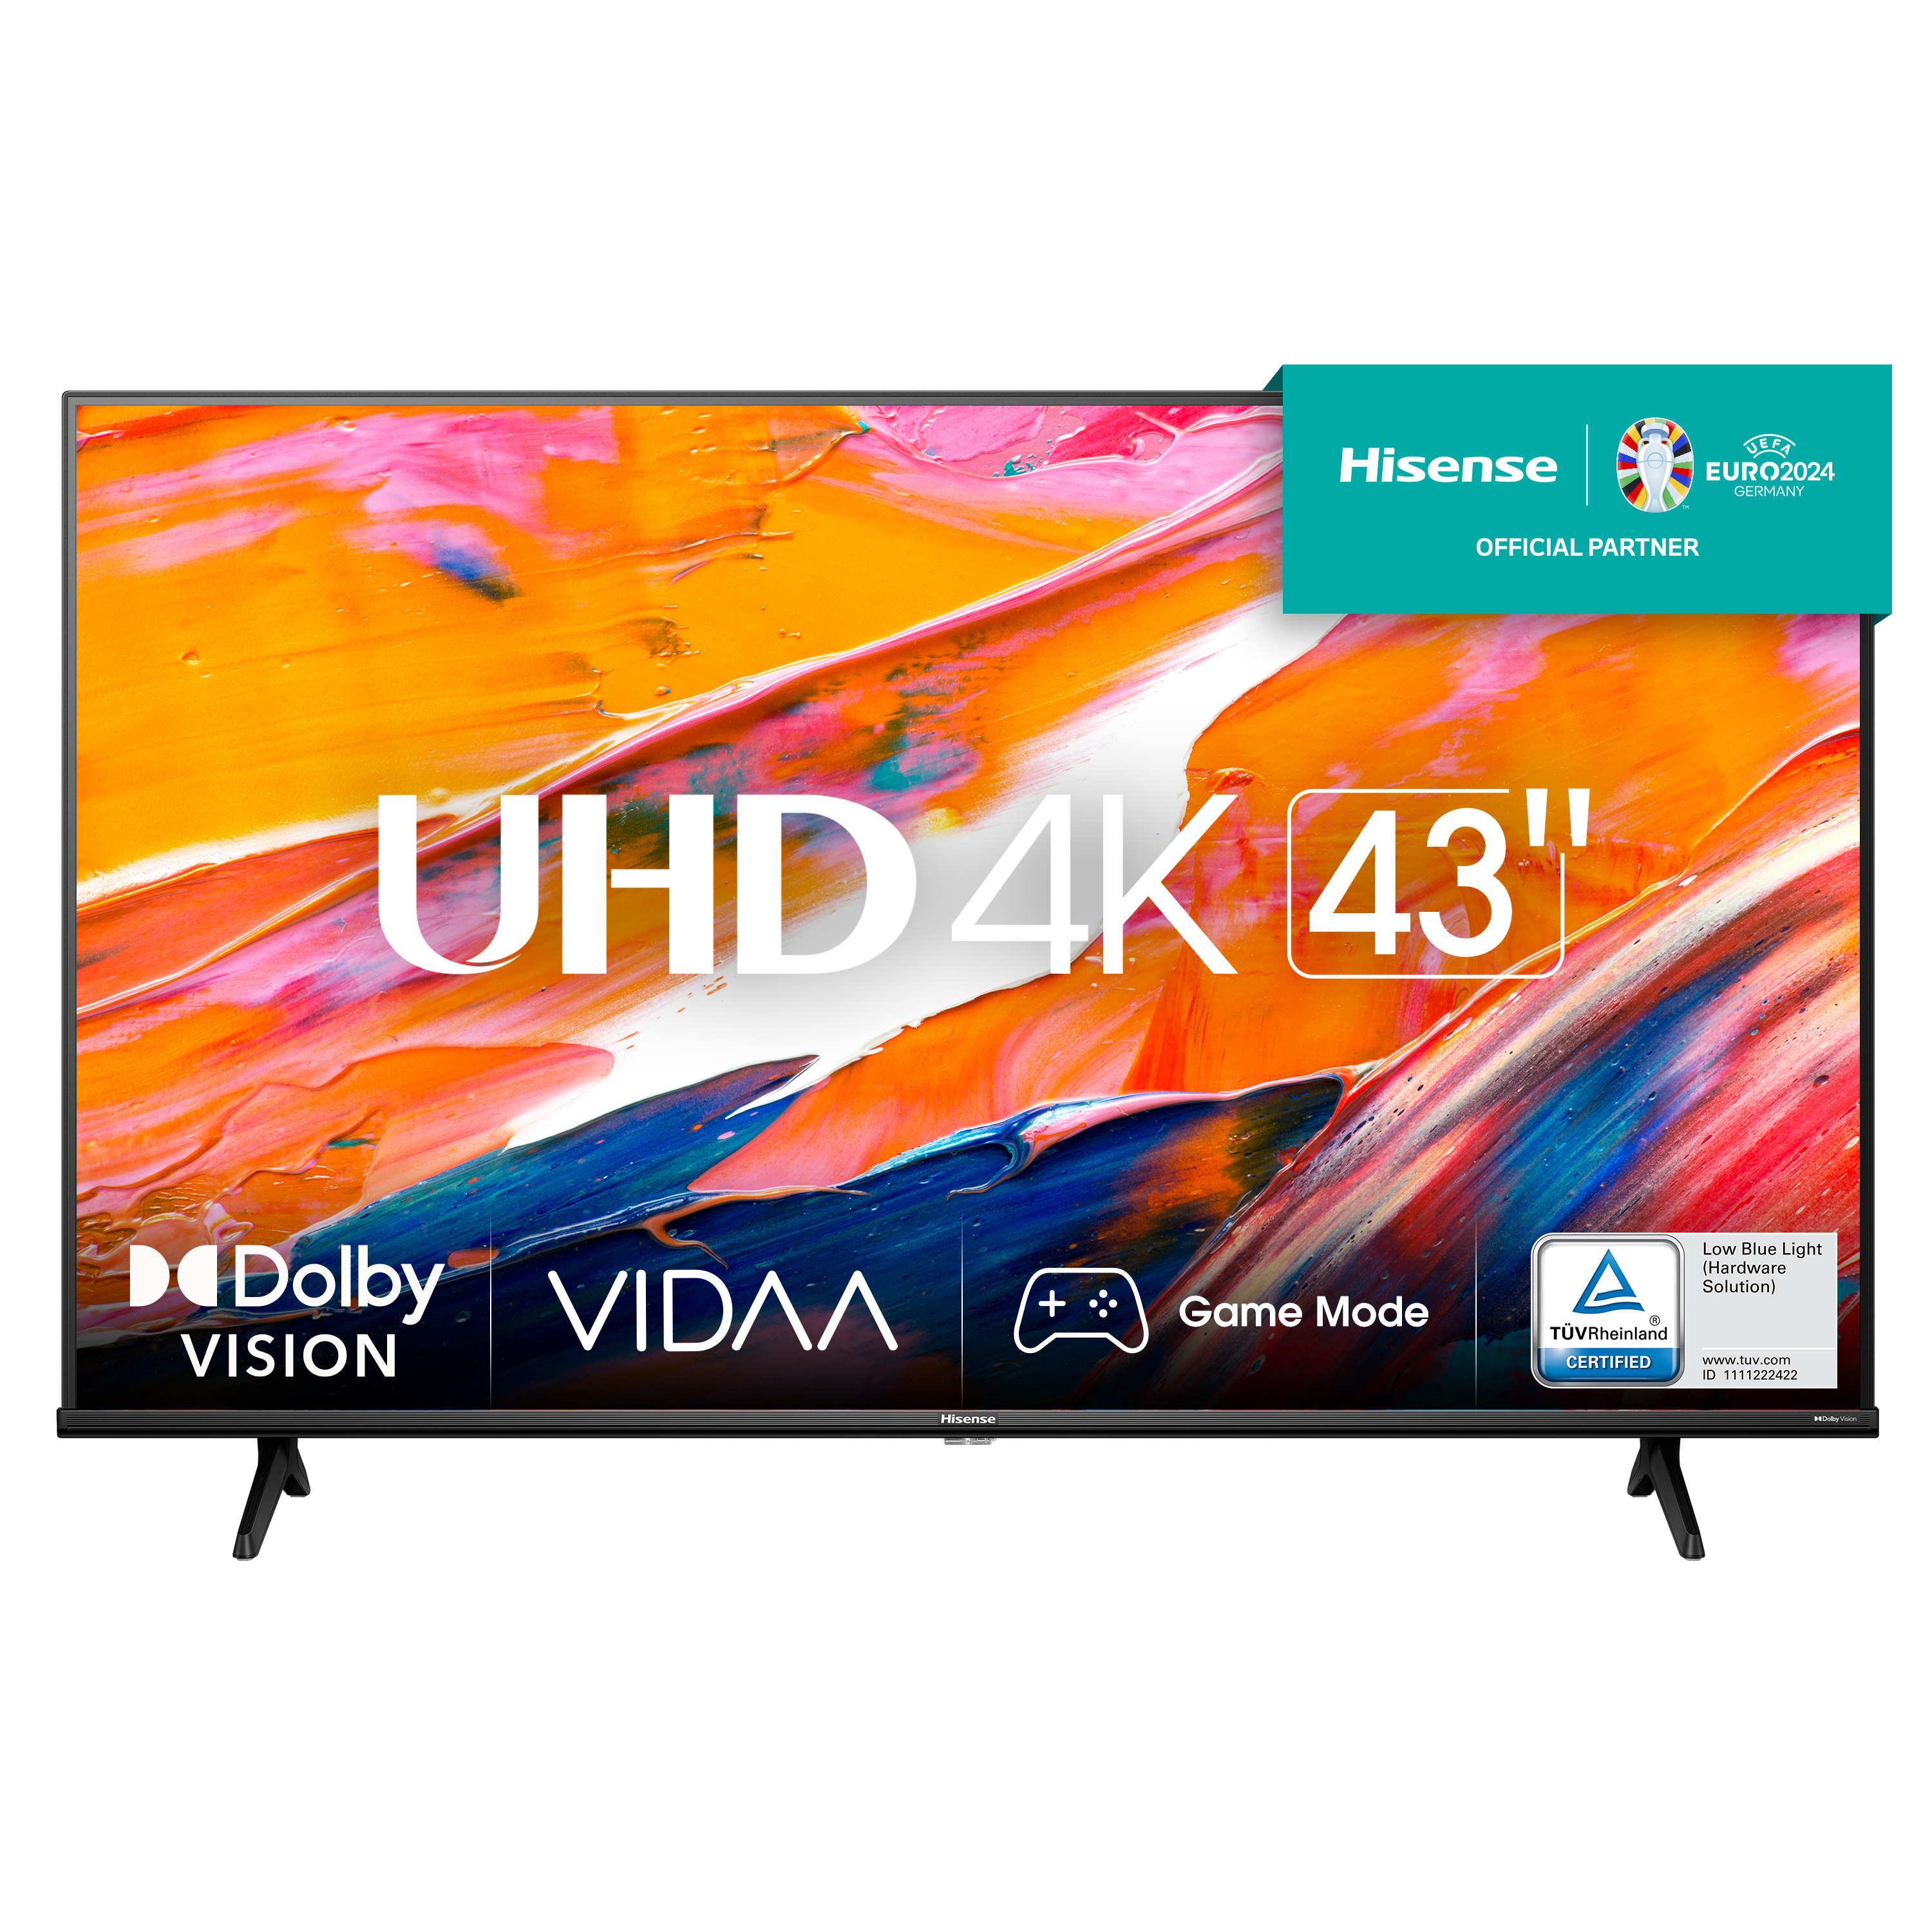 Image of Hisense TV LED televisore Ultra HD 4K 43” 43A6K Smart TV, Wifi, HDR Dolby Vision, AirPlay 2